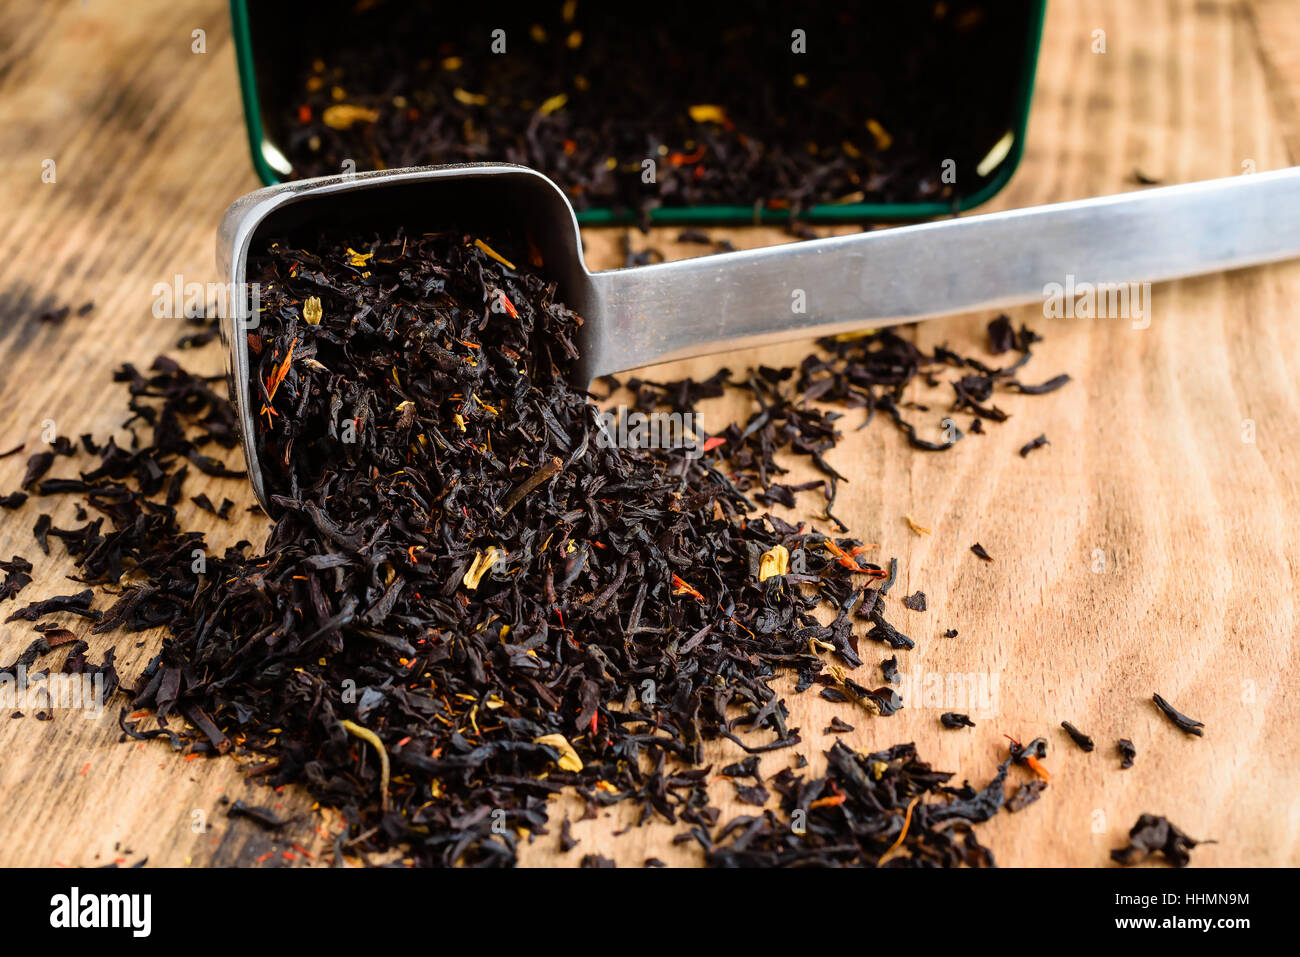 Flavored black tea spilling out of metal scoop on wooden board. Open tea canister in background. Stock Photo